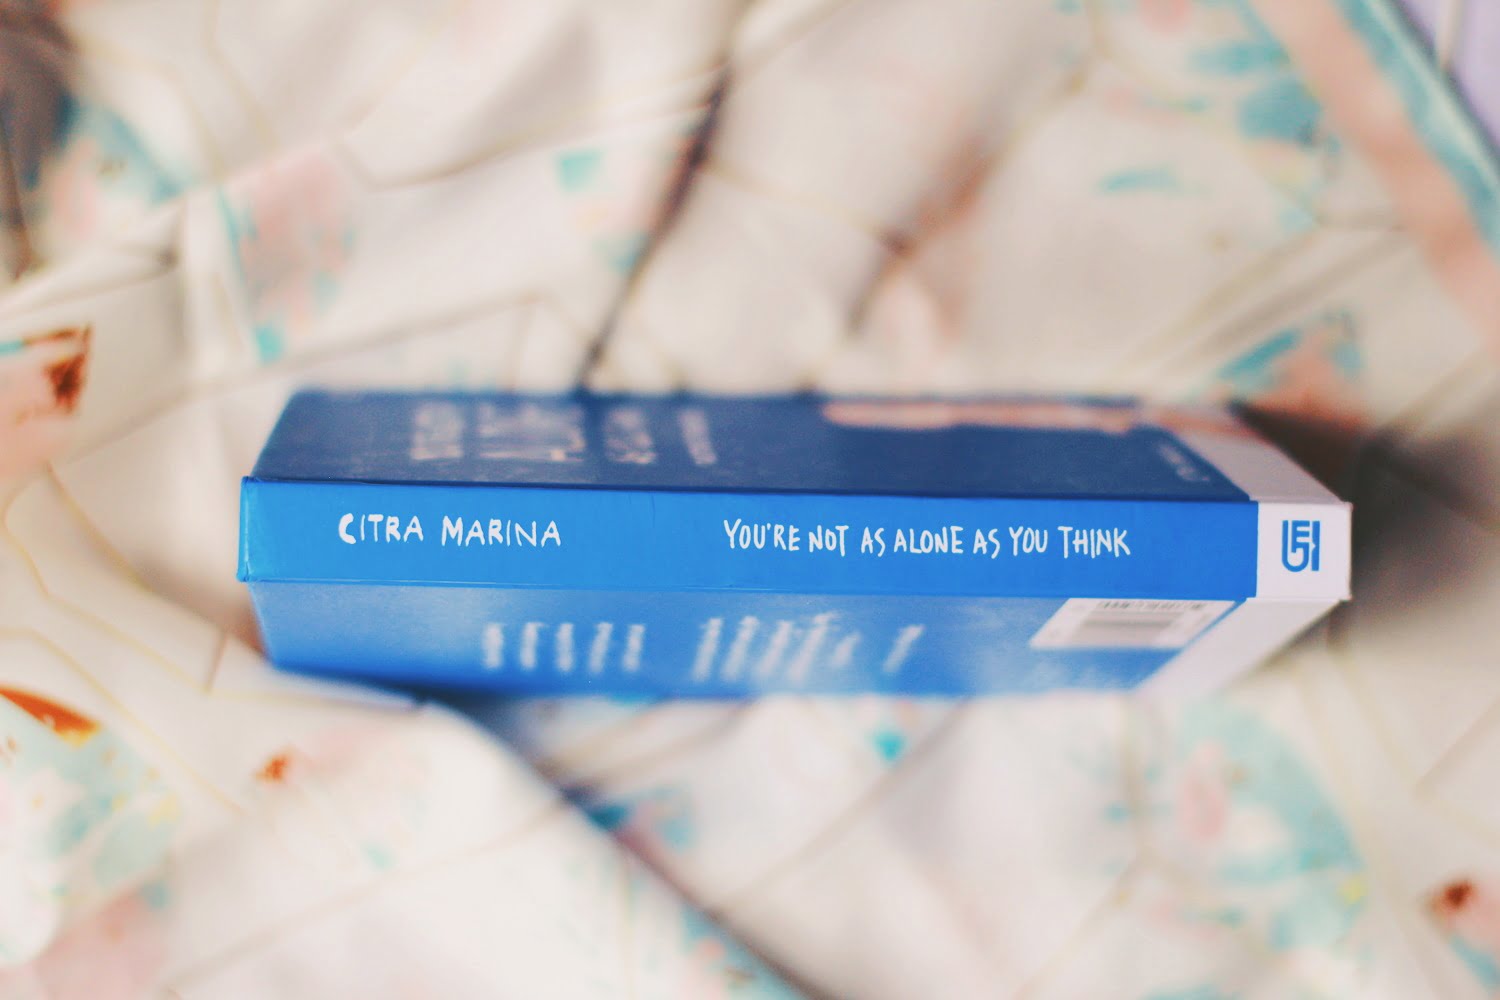 [BOOK REVIEW] The Stories of Choo Choo You're Not as Alone as You Think Karya Citra Marina